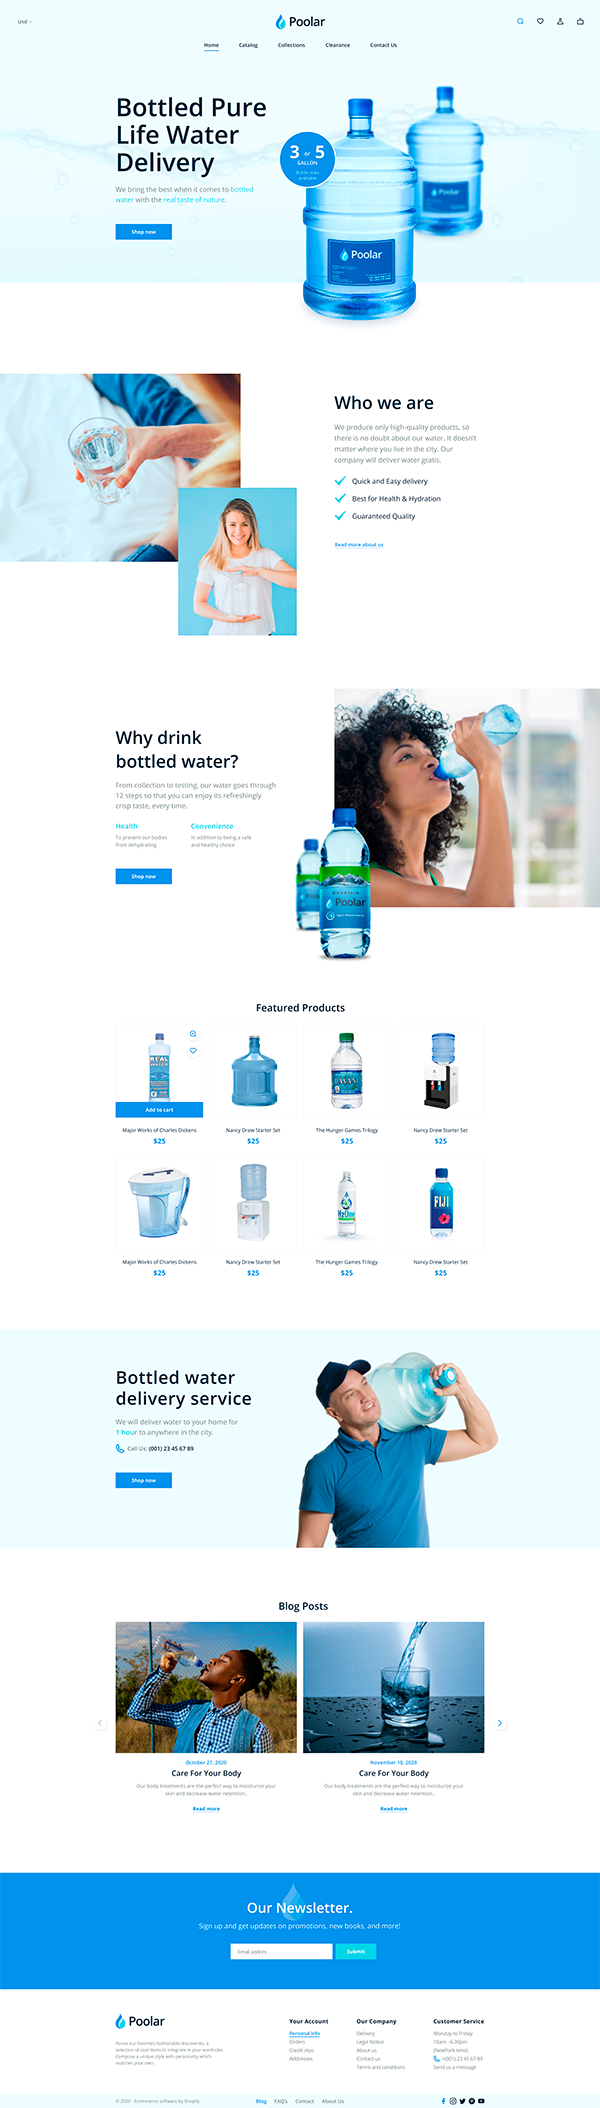 Poolar - Shopify Water Delivery Services Theme